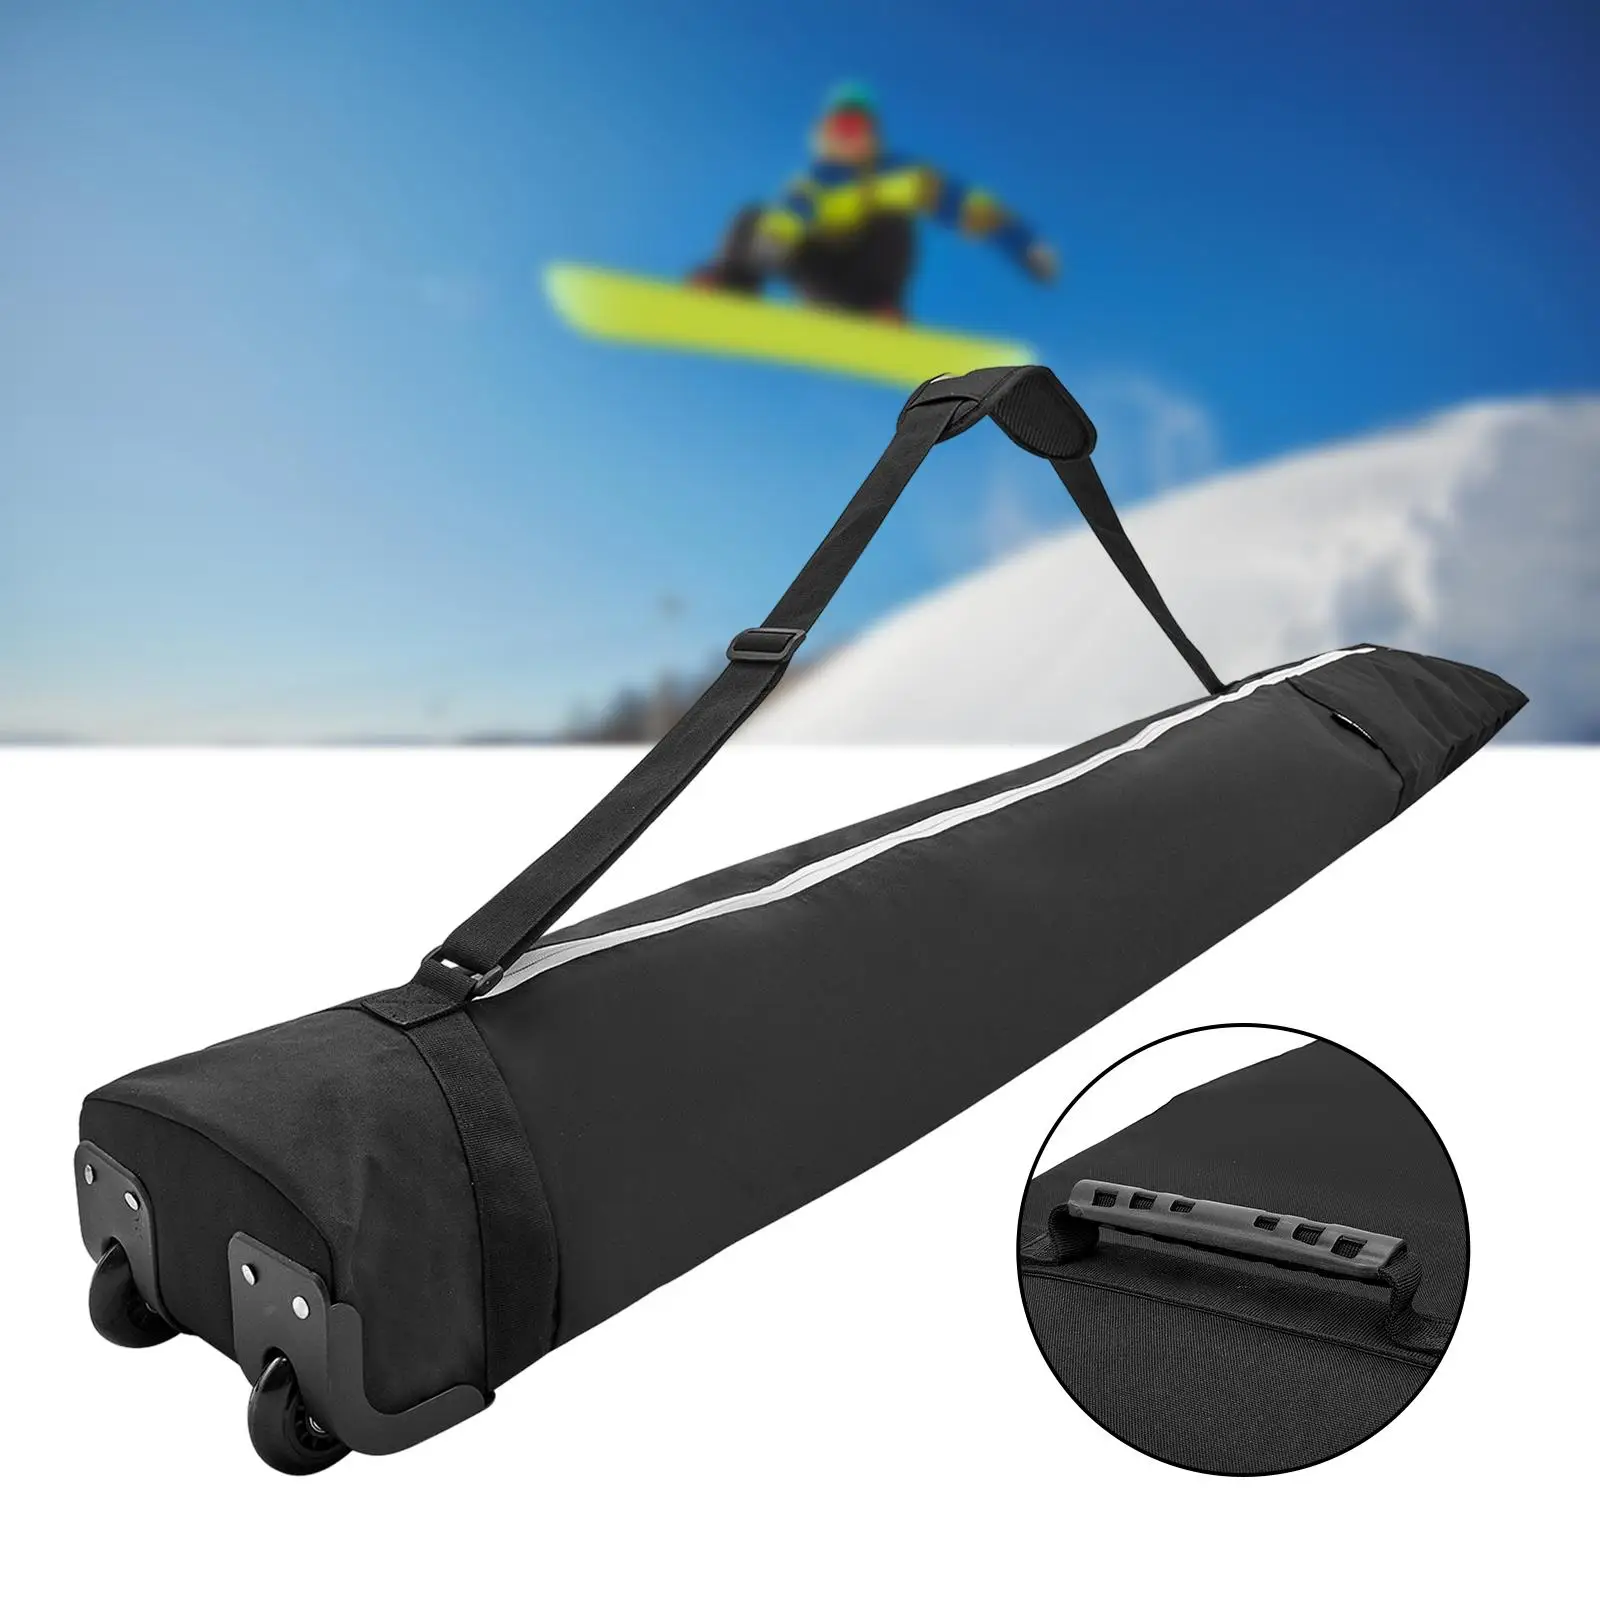 Rolling Snowboard Bag Extendable with Wheels for Air Travel Waterproof Transport Wrap Protection Sleeve for Snowboard Ski Gifts